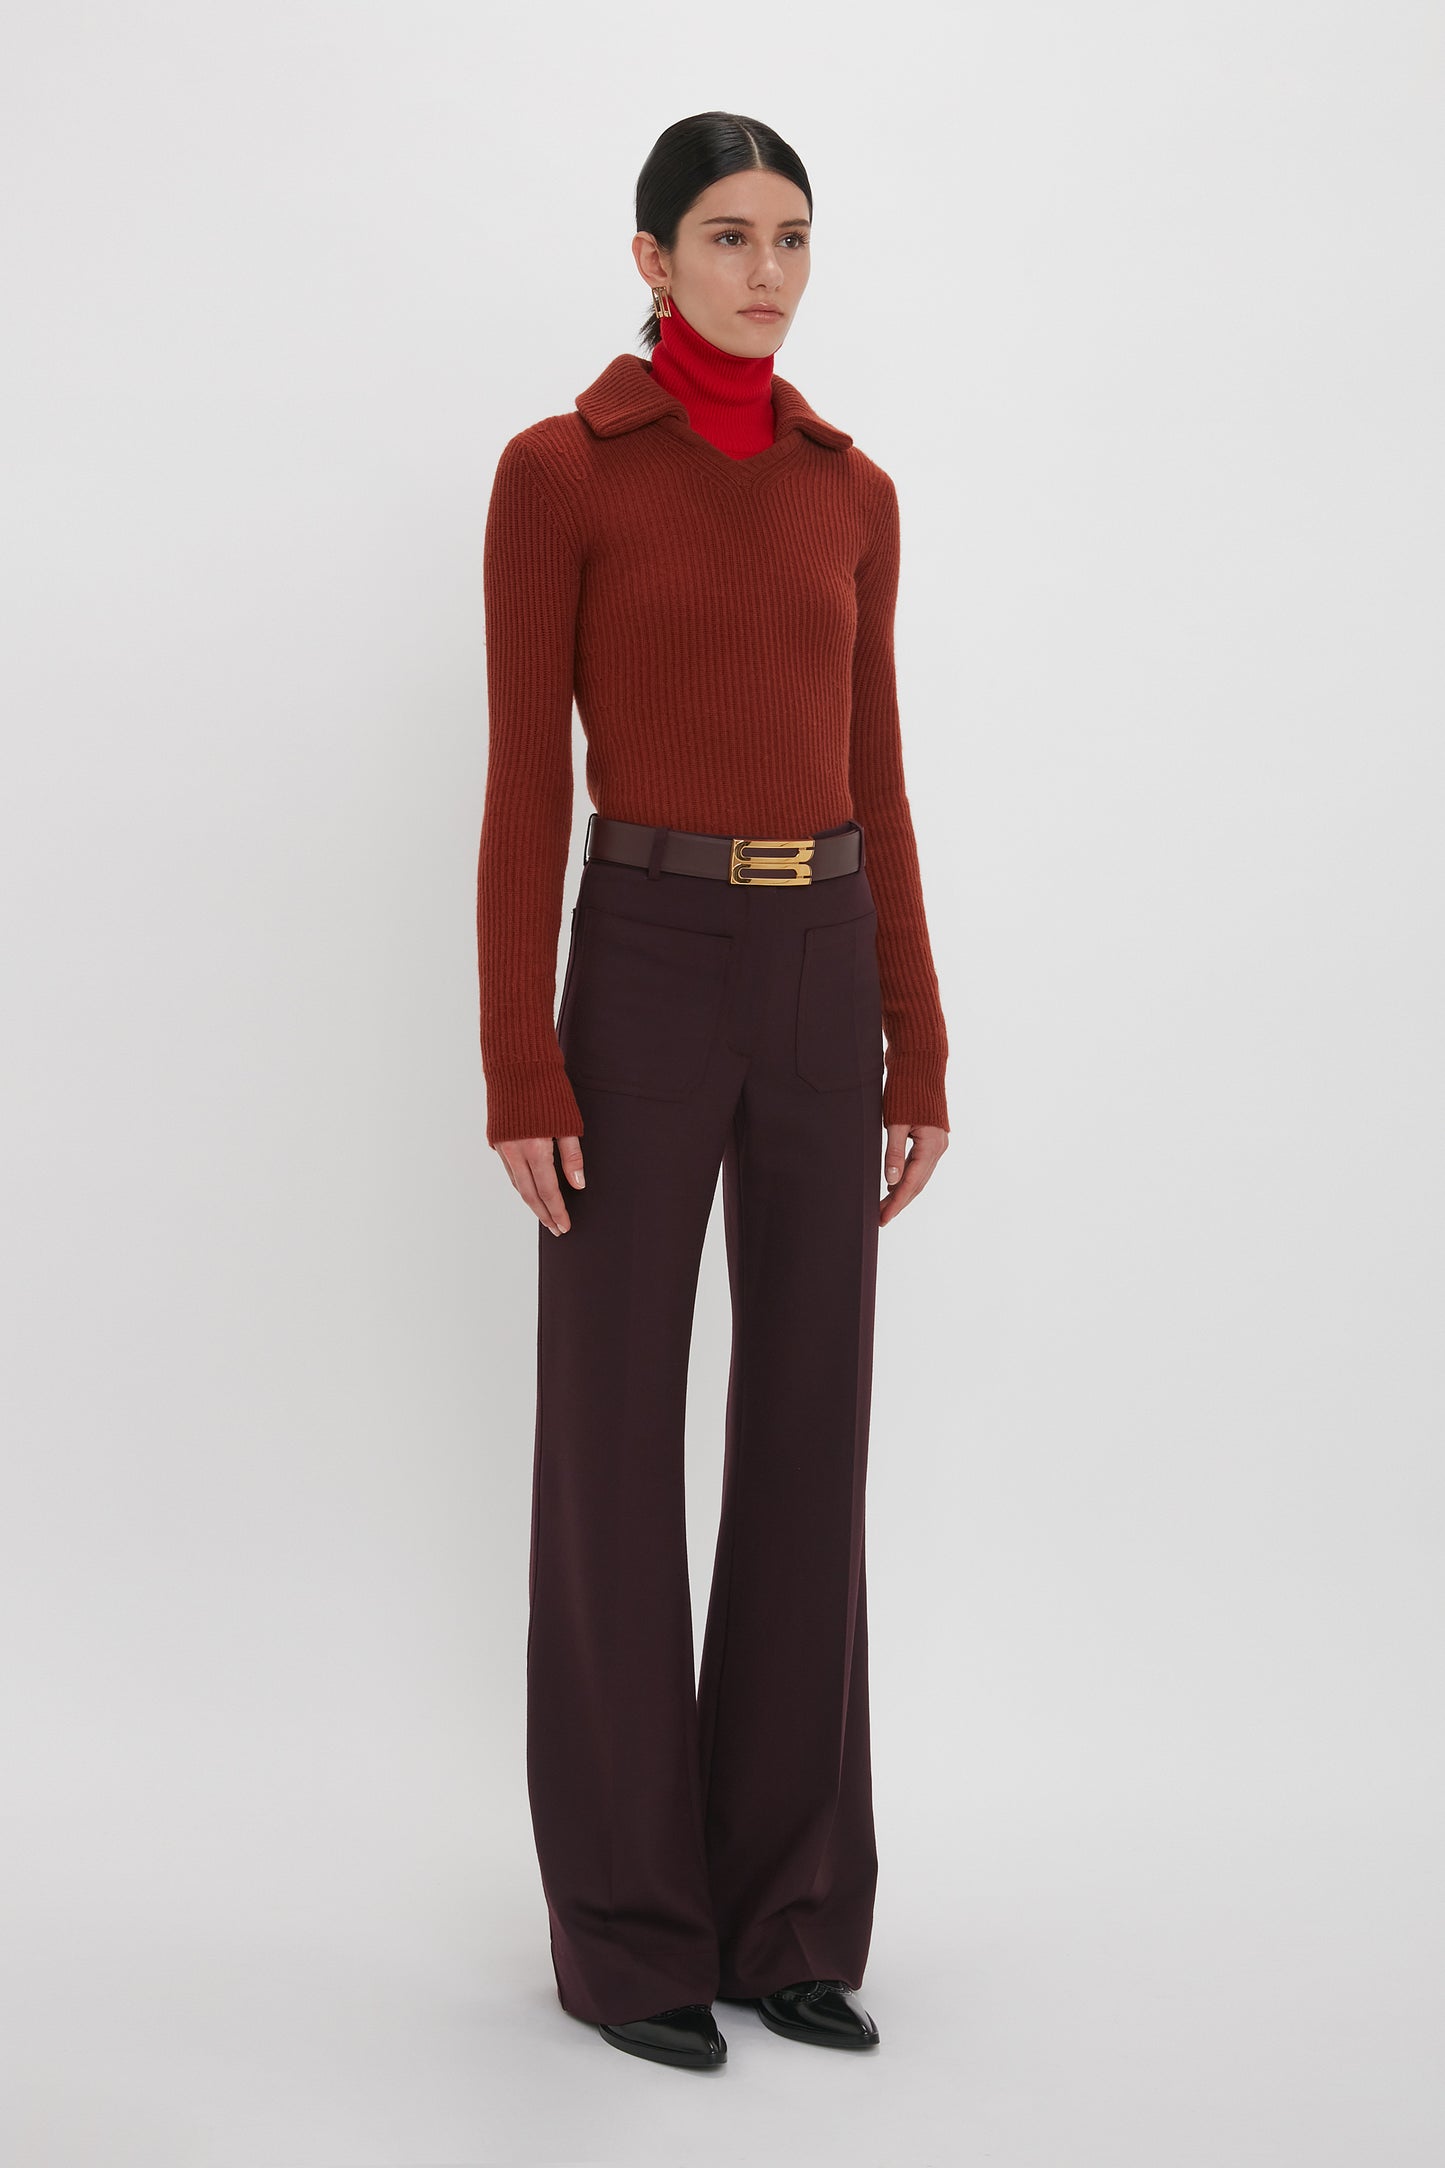 A woman stands against a plain white background, wearing a red ribbed sweater, a red turtleneck, and high-waisted, wide-leg Alina Trouser In Deep Mahogany made from recycled wool with a brown belt. This Victoria Beckham-inspired look effortlessly combines style and sustainability.